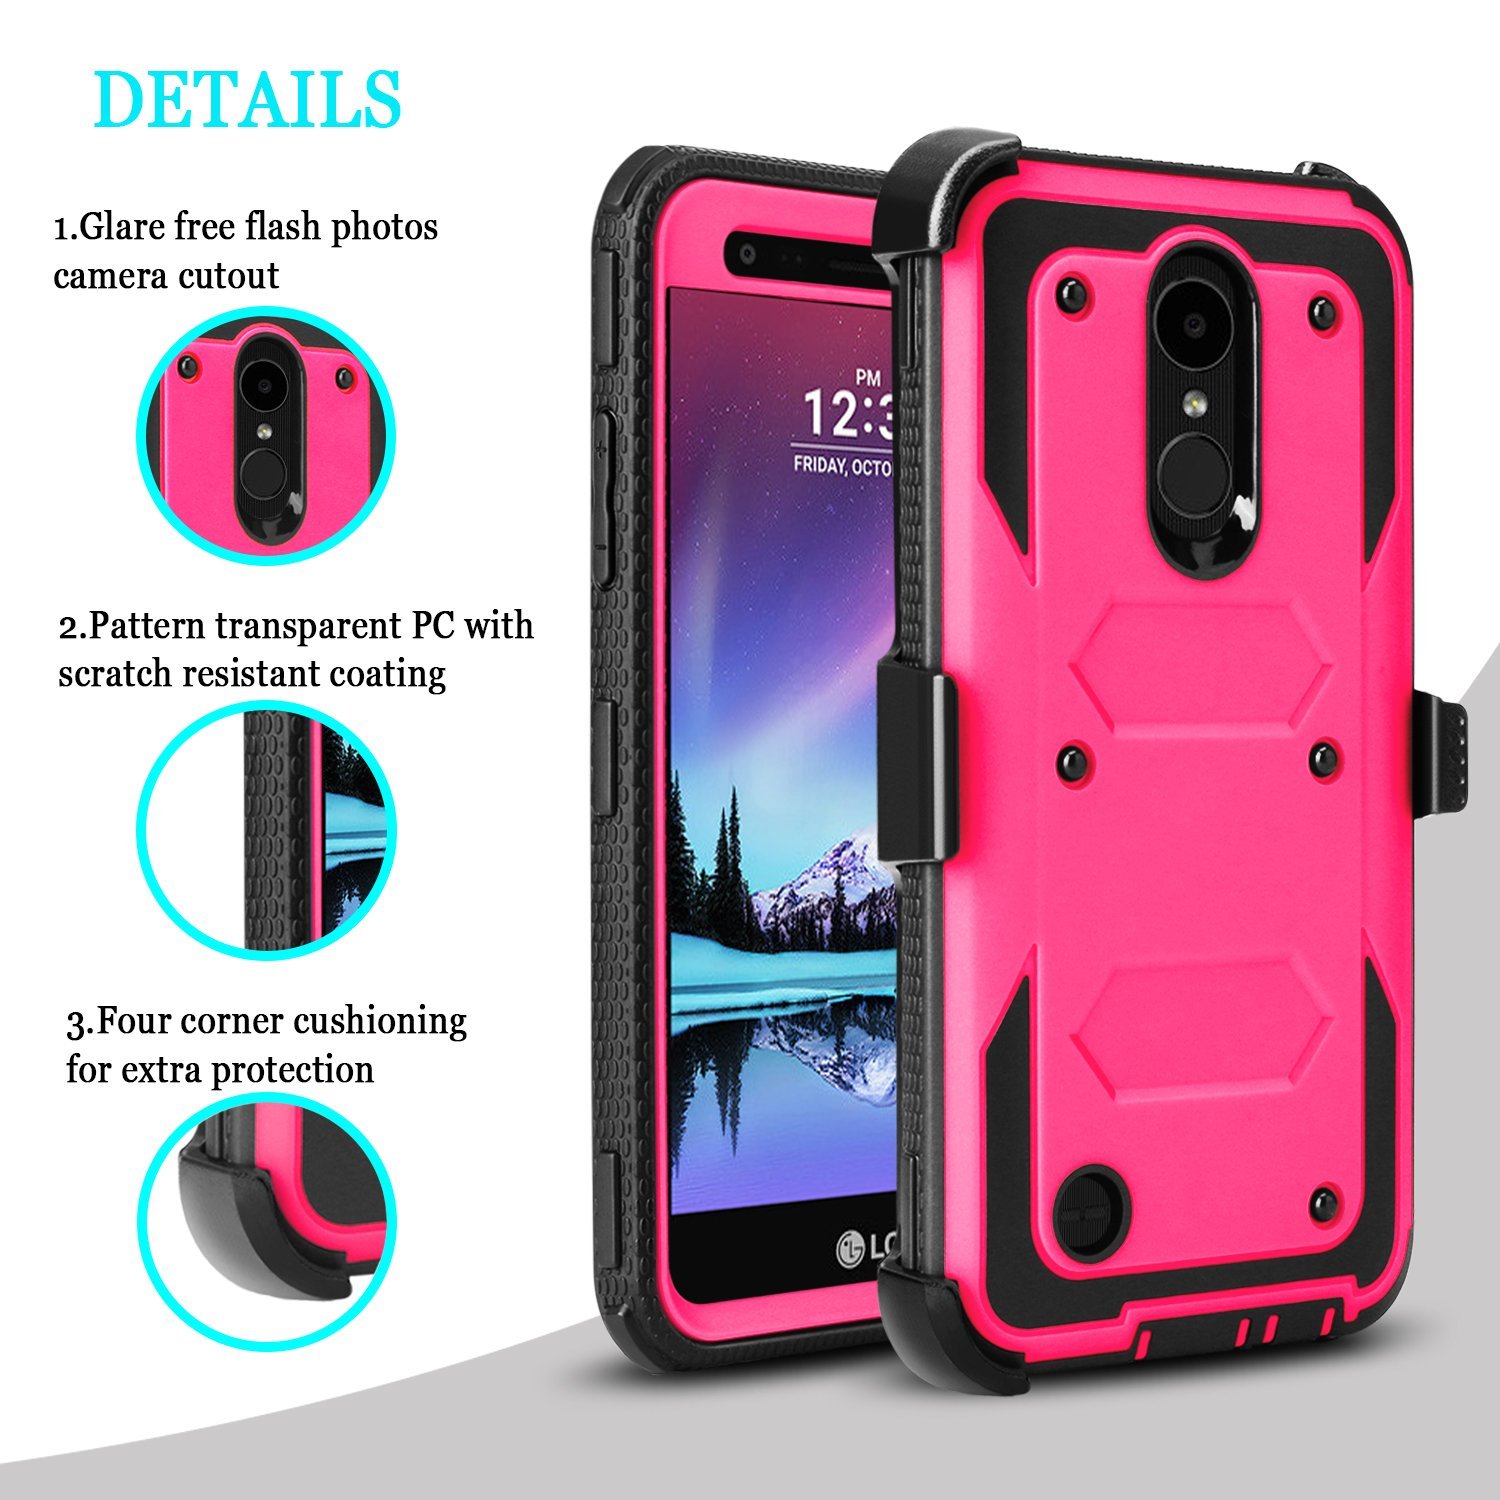 LG K20 Plus Case, LG K20 V Case, LG LV5 Case, LG K10 2017 Case, LG Harmony Case, Mignova Heavy Duty Armor Case With Screen Protector + Kickstand Belt Swivel Clip Holster Cover-Pink - image 5 of 8